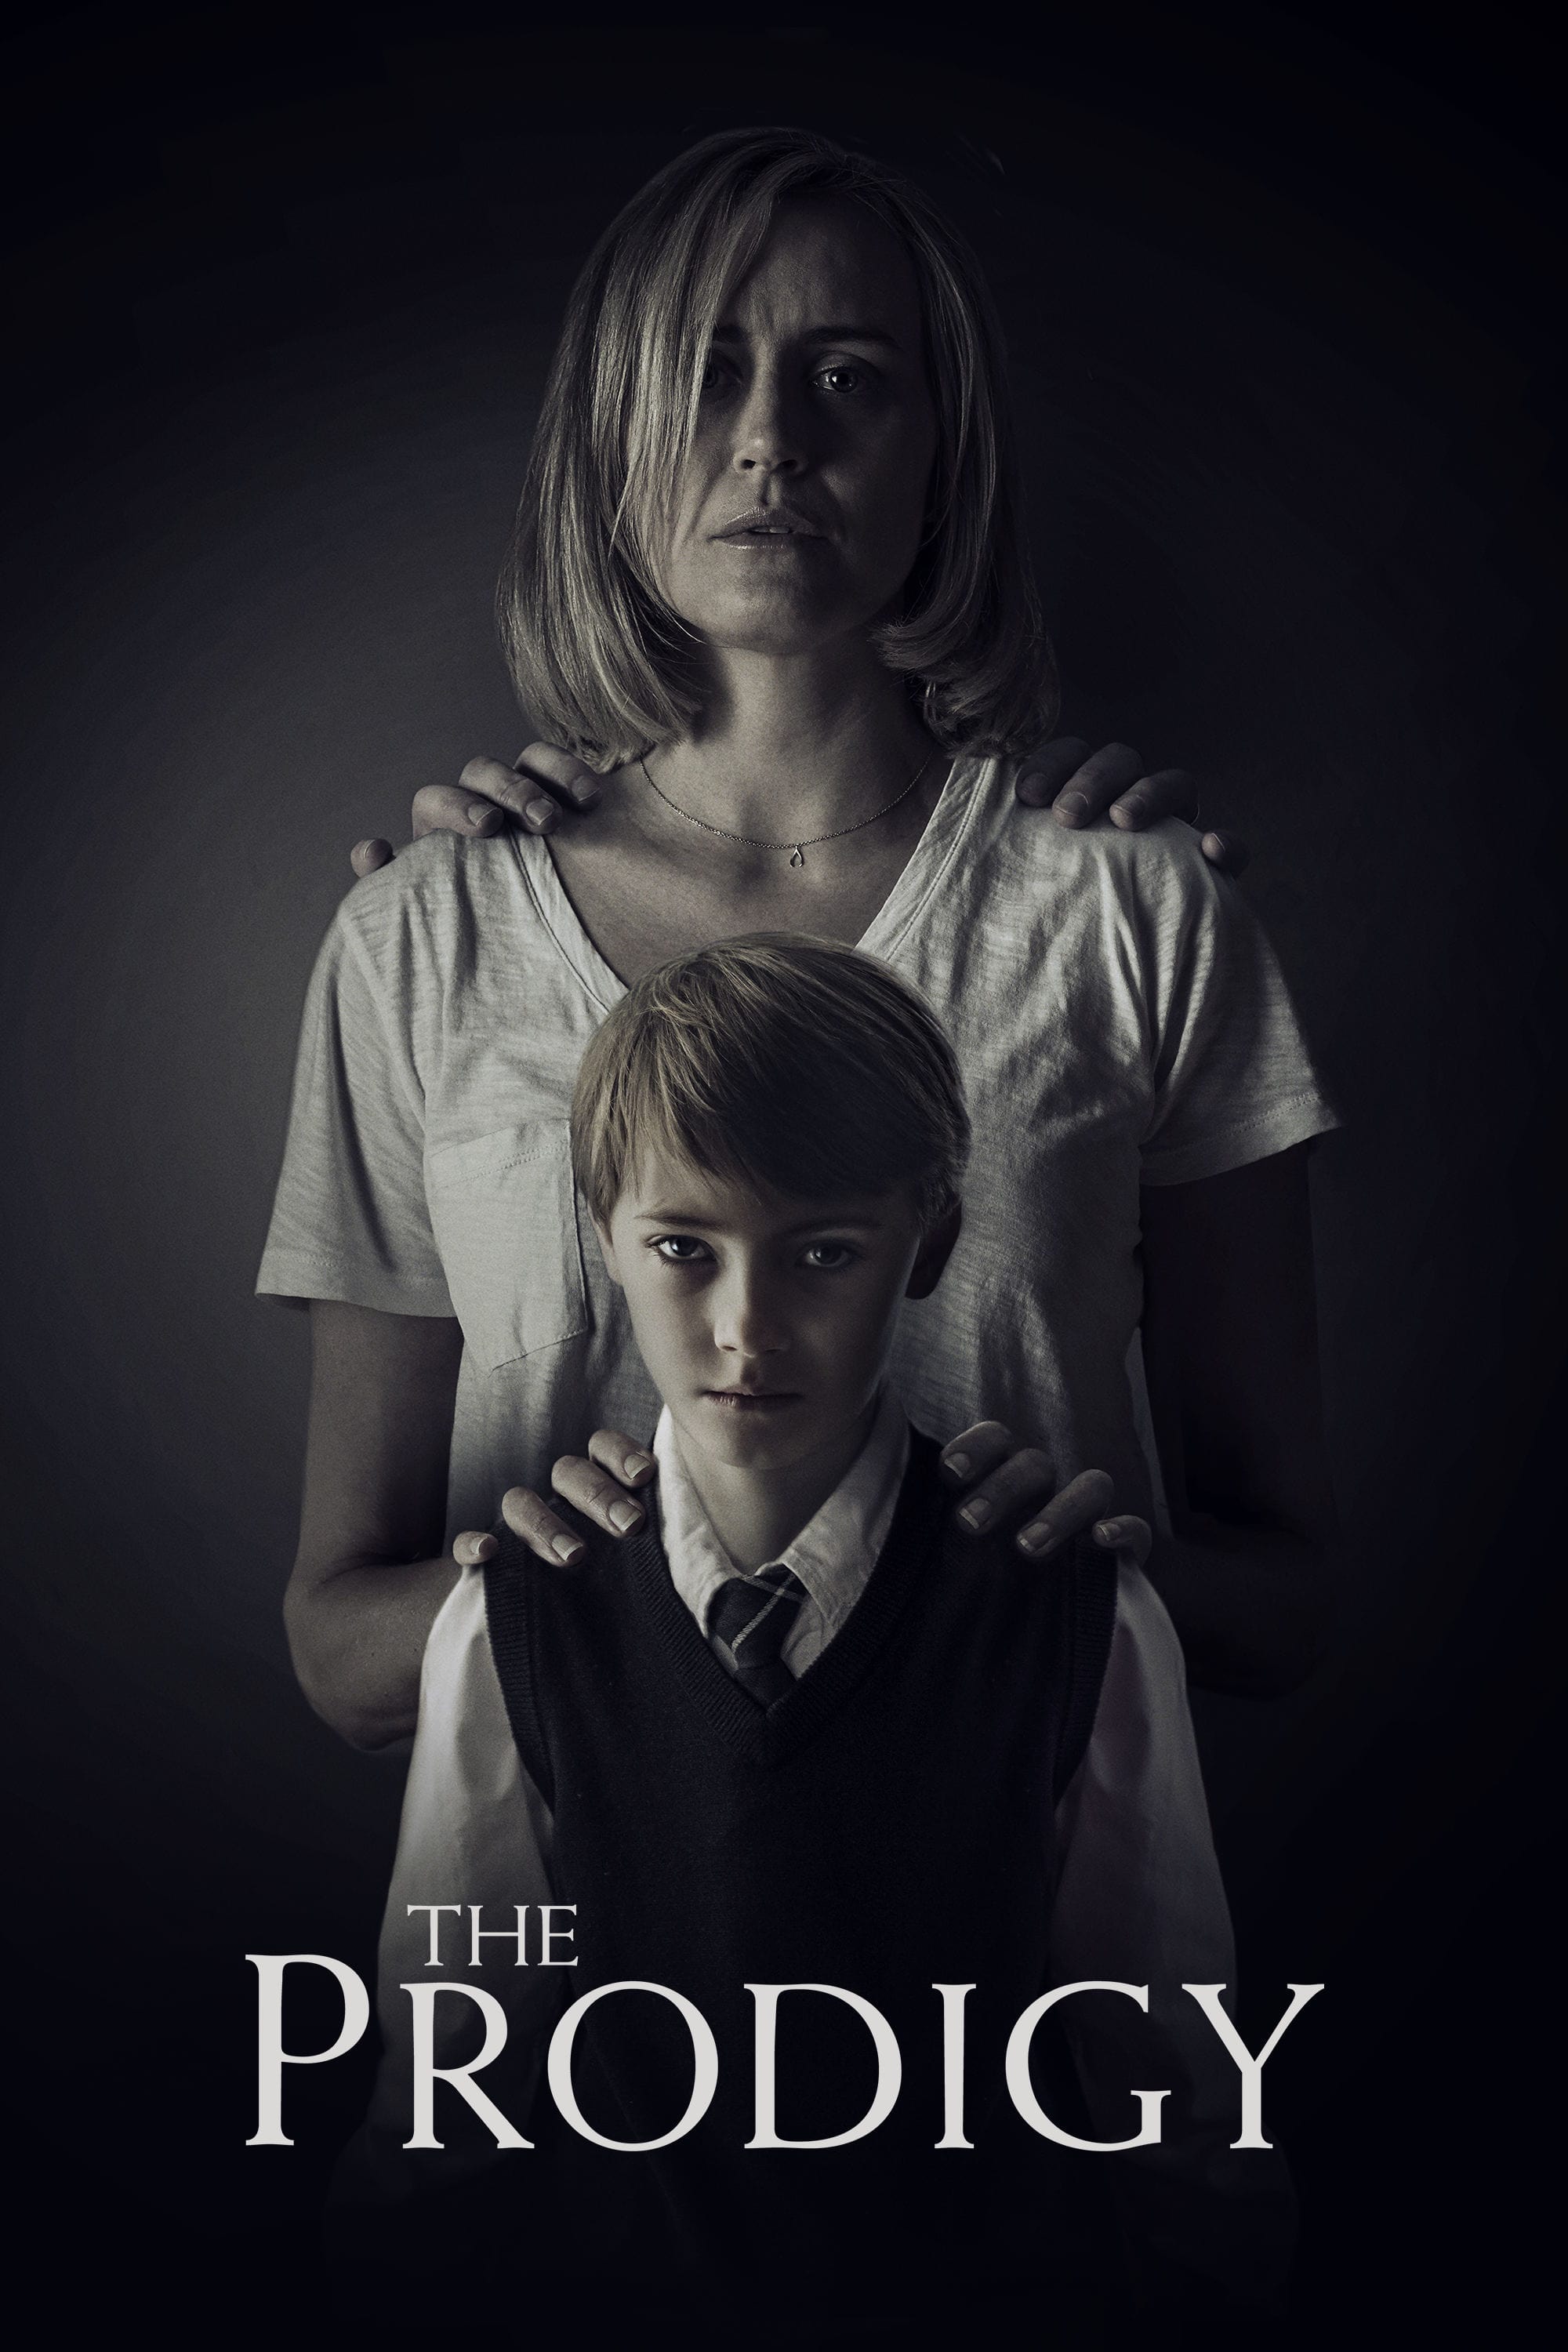 Poster for the movie "The Prodigy"